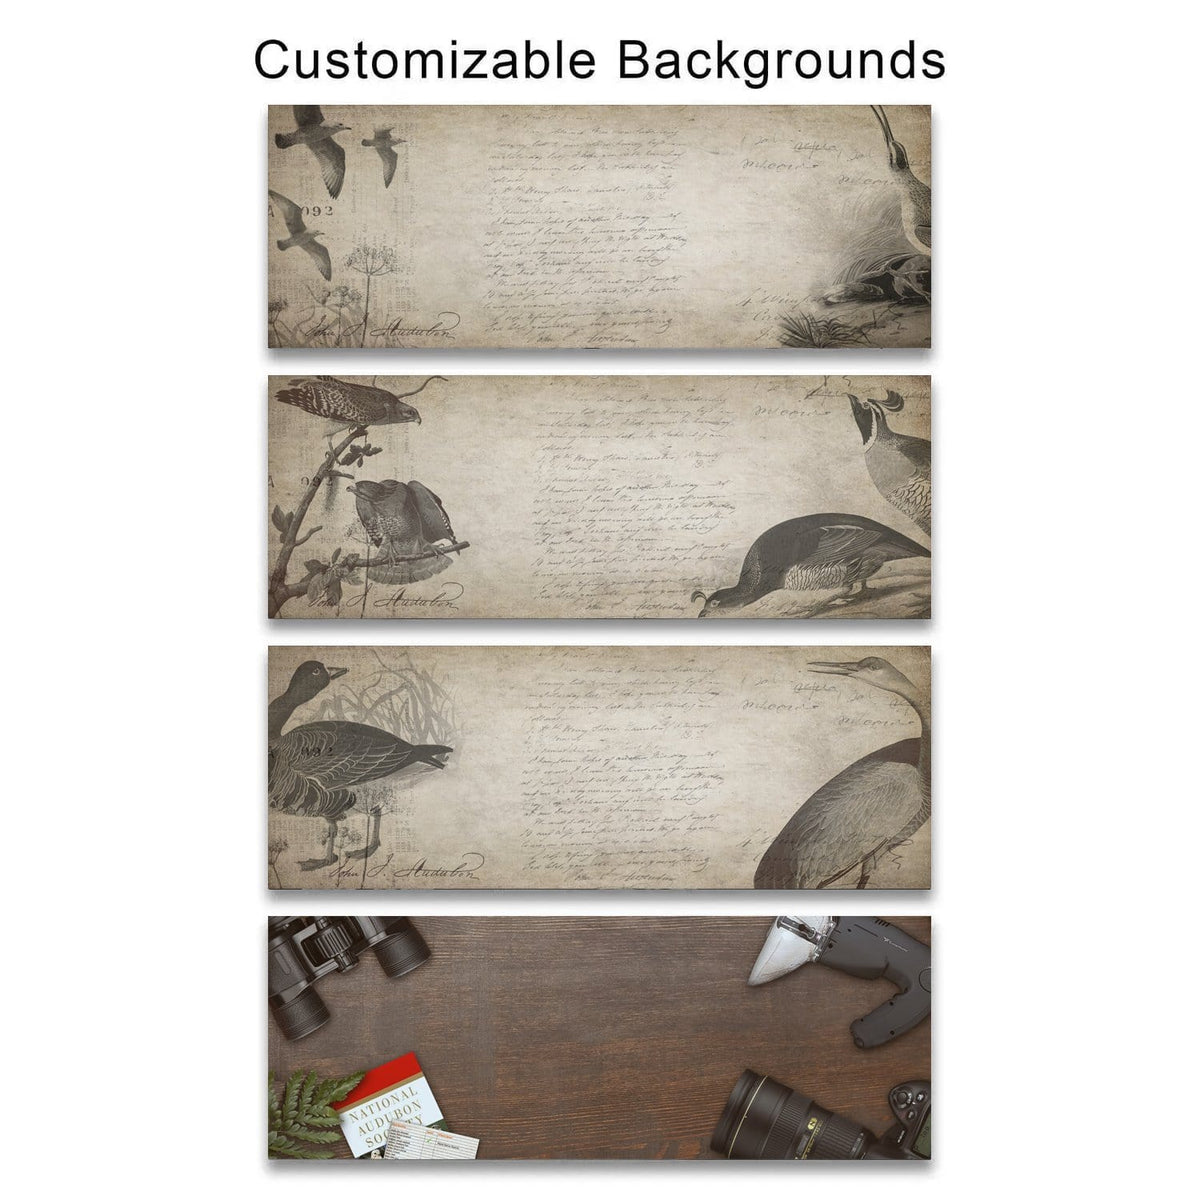 Birding background options for your personalized gift